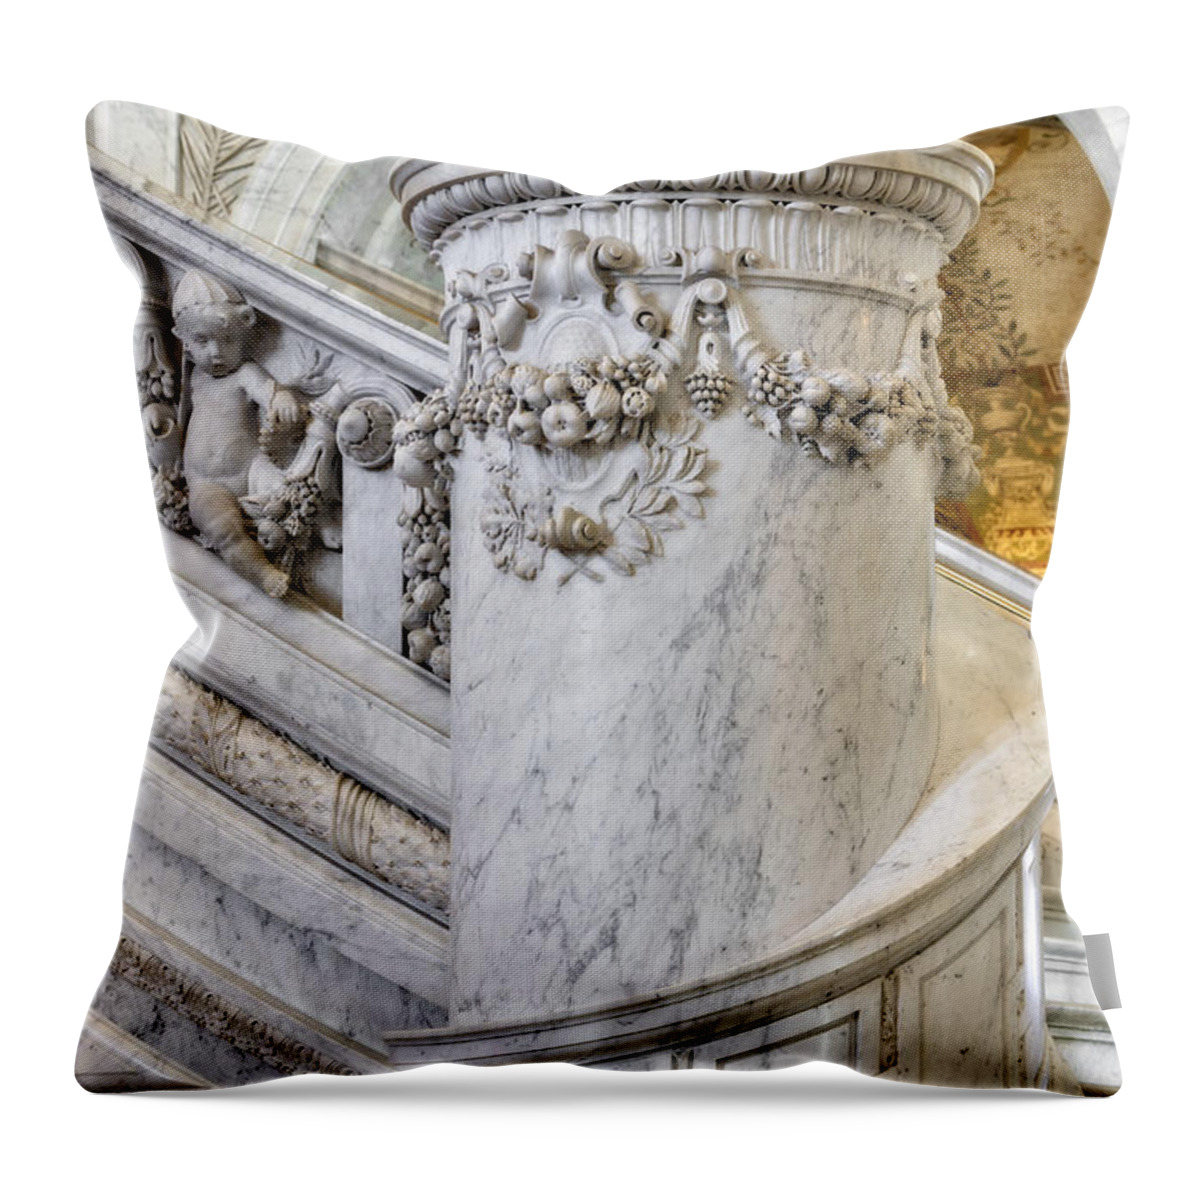 Us Library Of Congress Throw Pillow featuring the photograph Library Of Congress Cherubs by Susan Candelario